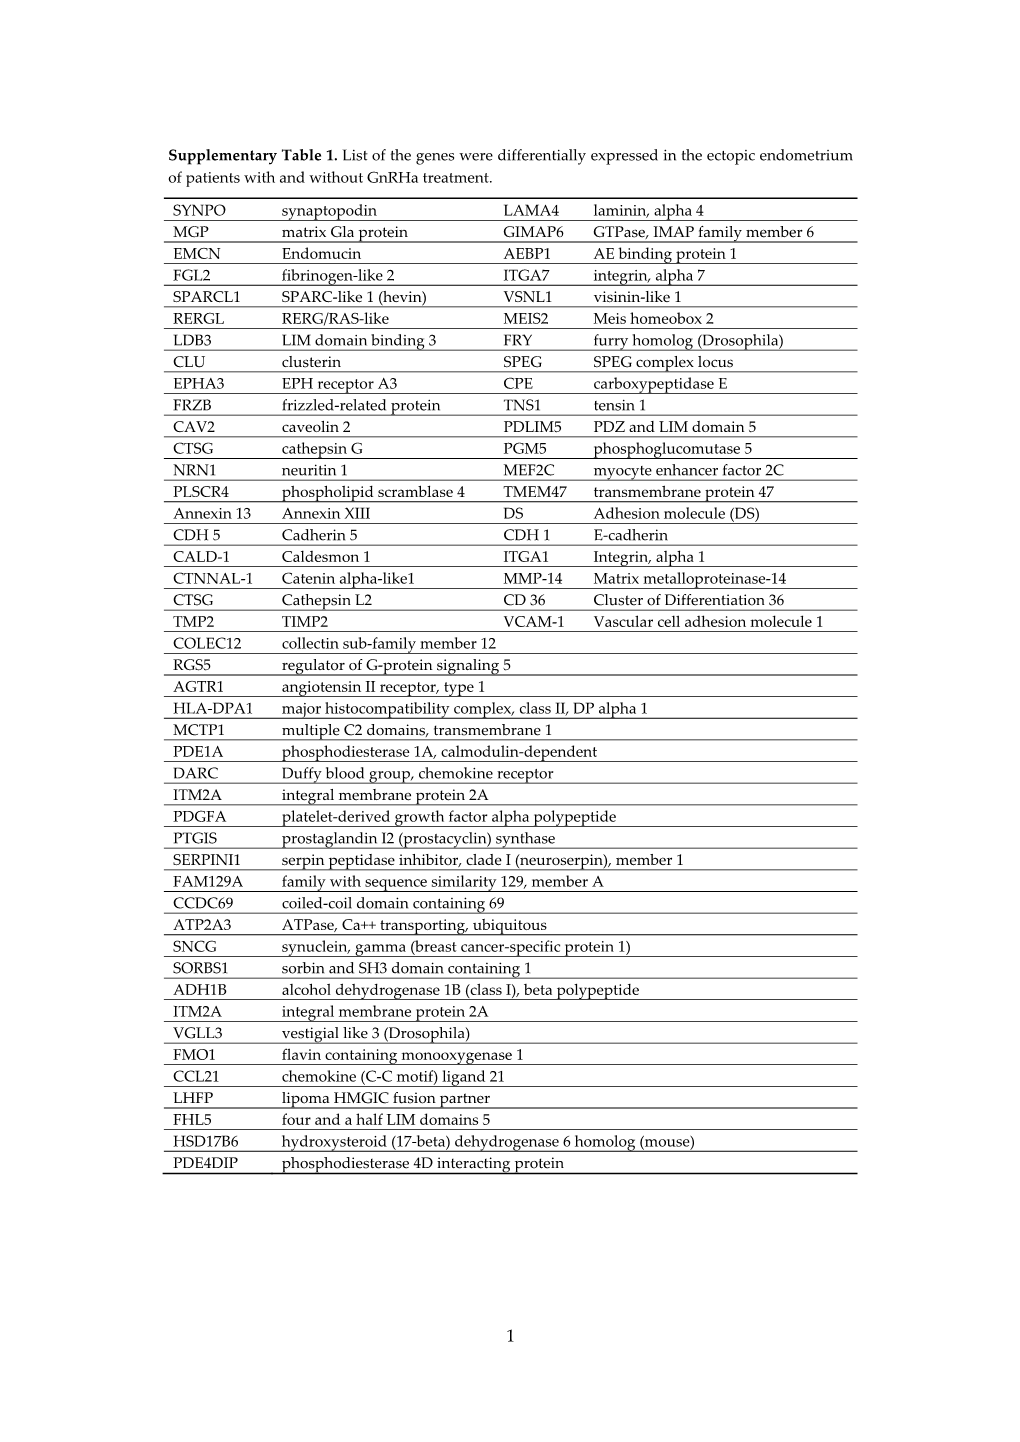 Supplementary Table 1. List of the Genes Were Differentially Expressed in the Ectopic Endometrium of Patients with and Without Gnrha Treatment